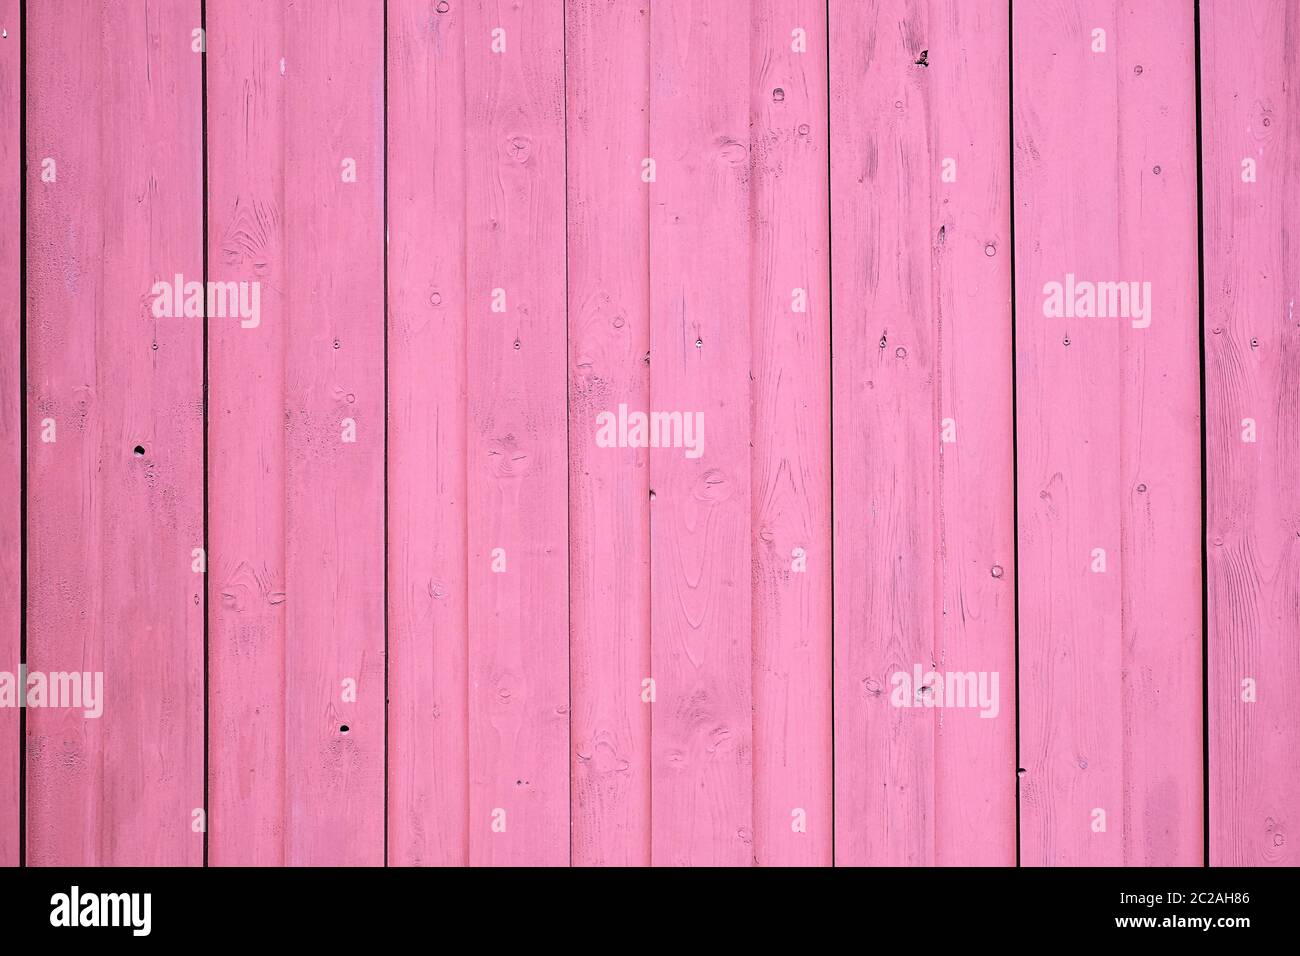 Background from a pink screen of boards Stock Photo